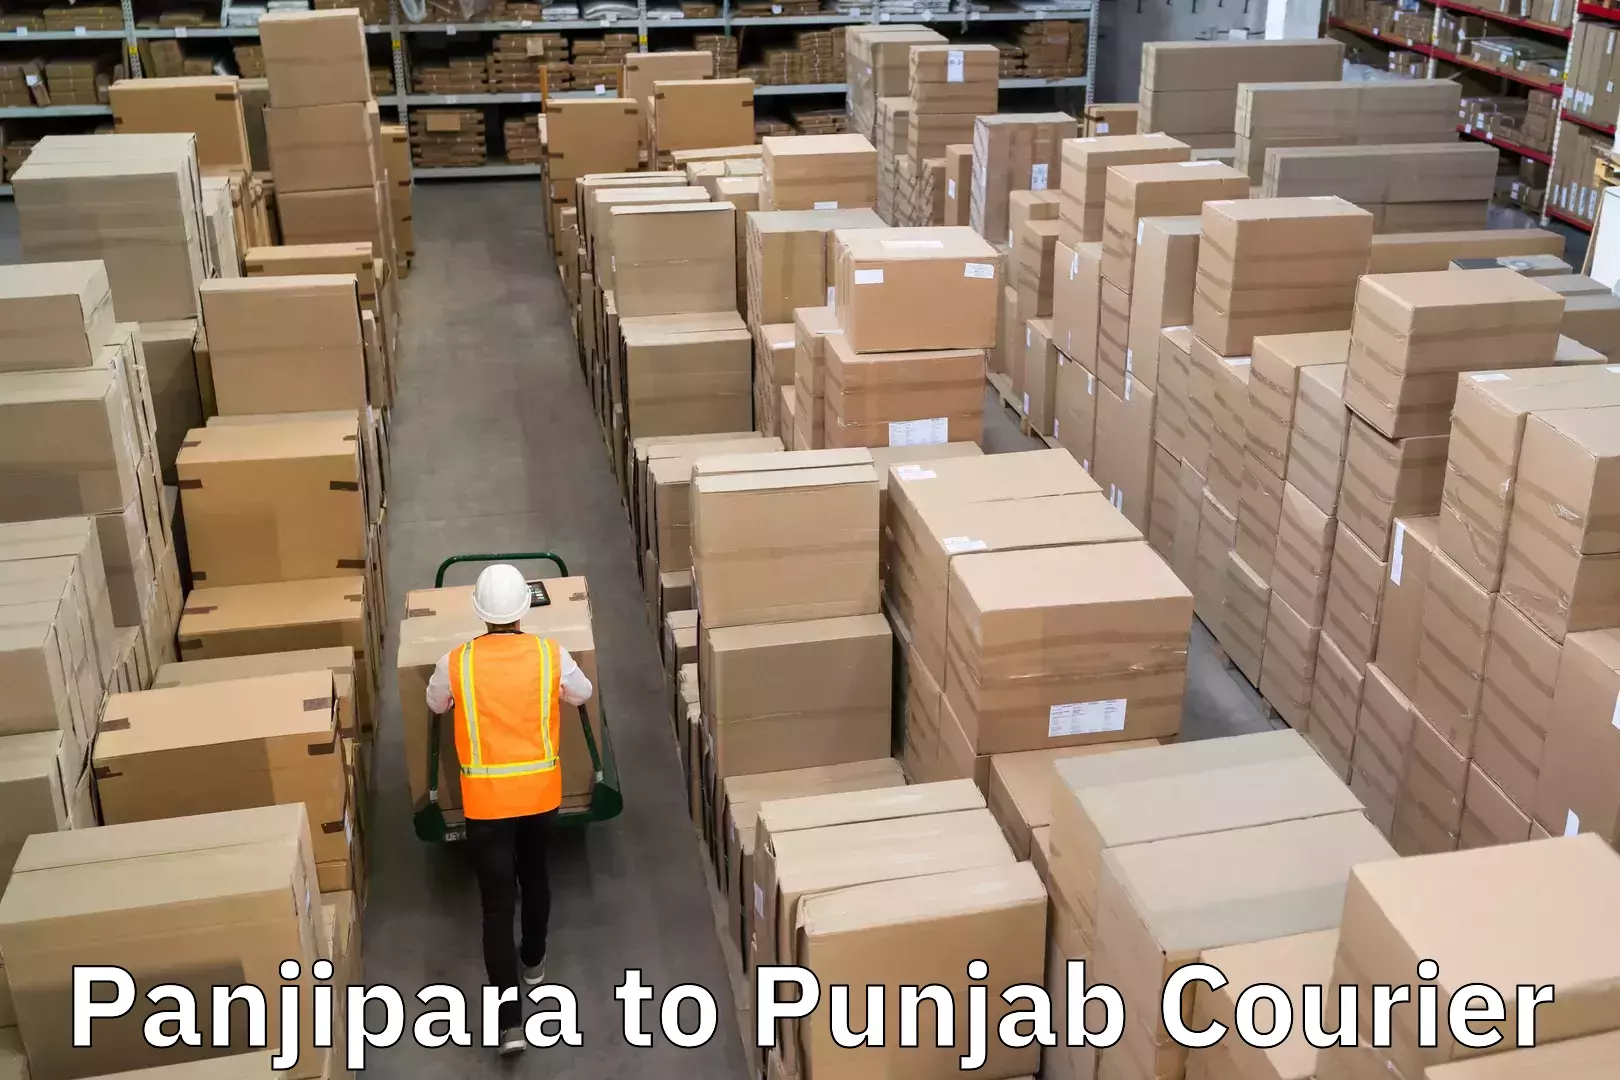 End-to-end delivery Panjipara to Punjab